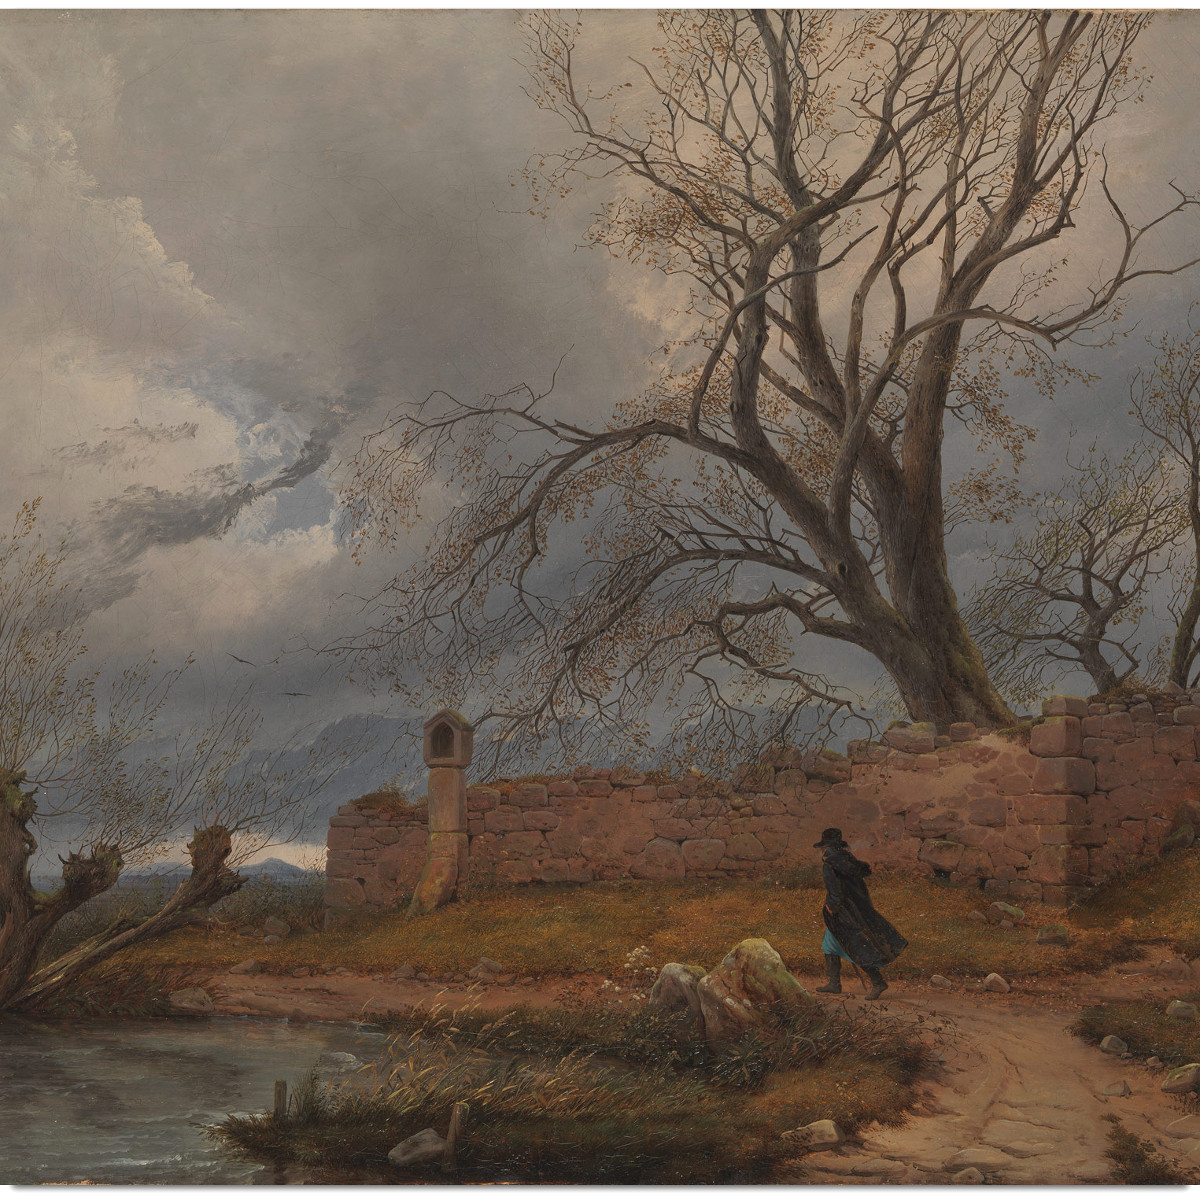 Wanderer in the Storm (1835), by Julius von Leypold (Public domain)